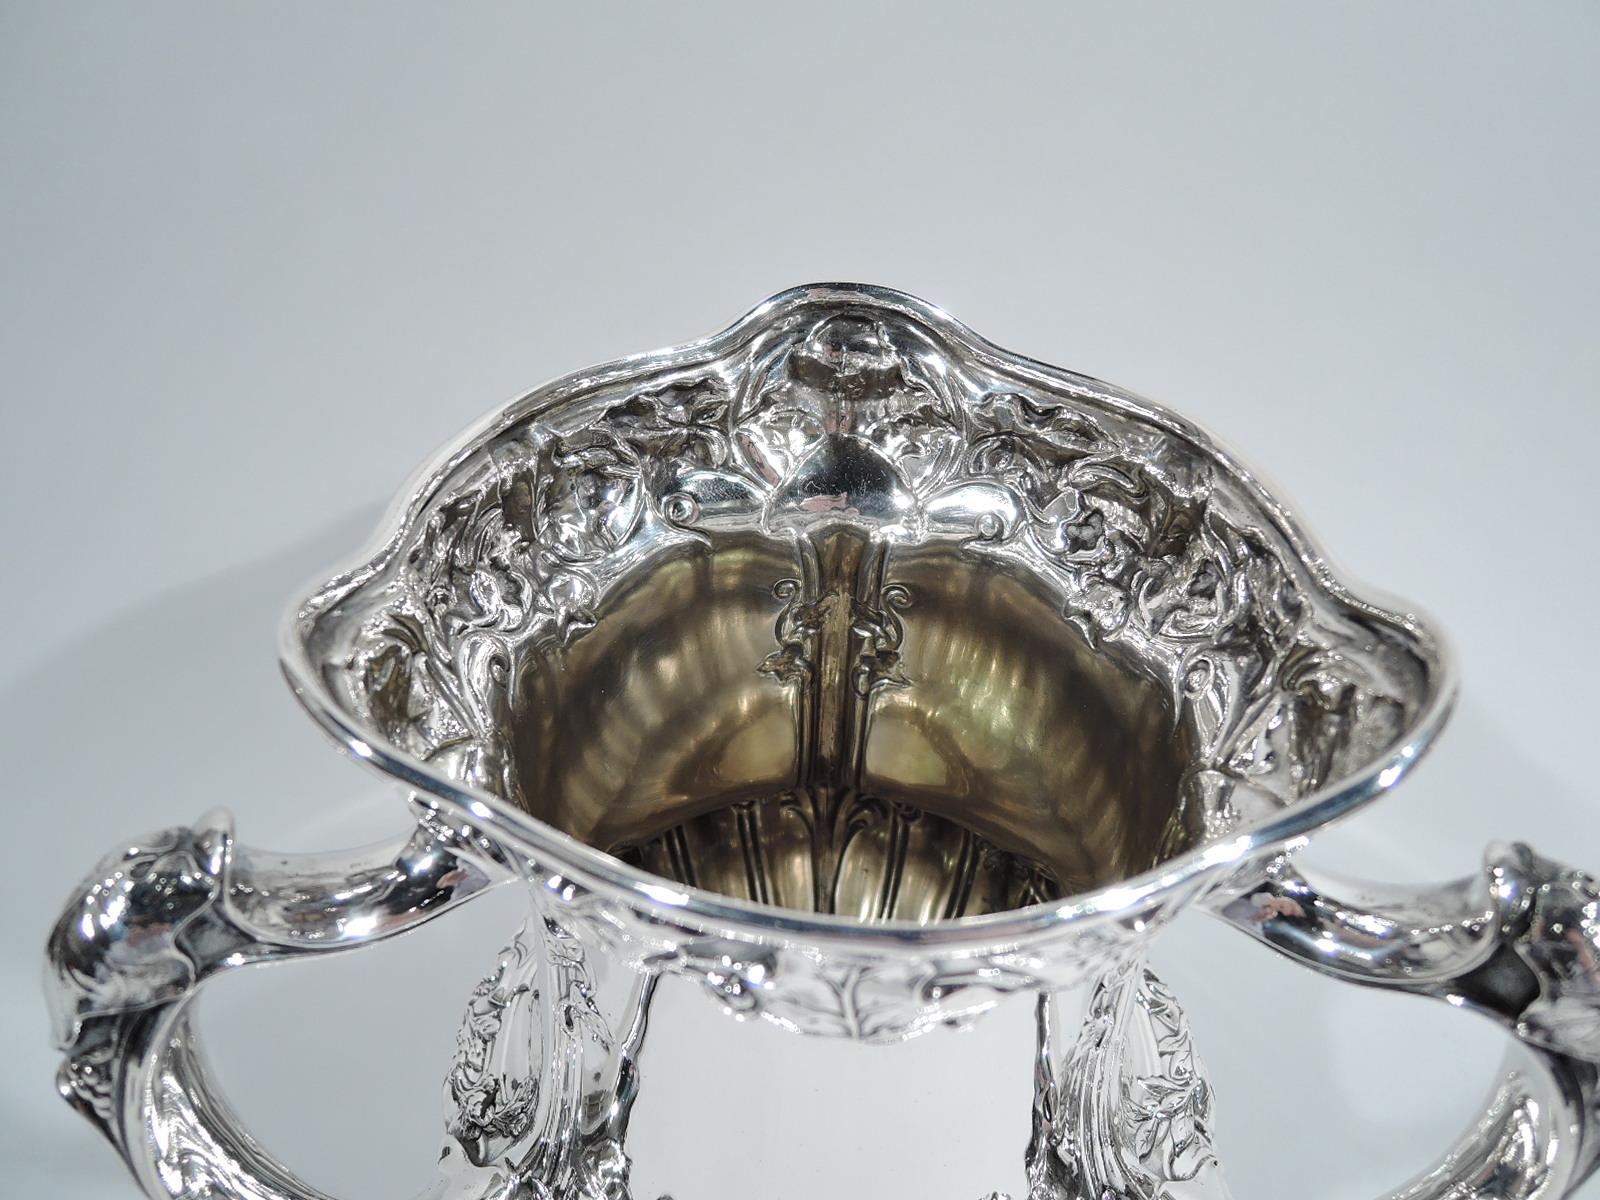 Edwardian sterling silver loving cup. Made by Gorham in Providence in 1907. Bellied urn with 3 leaf-capped handles and domed foot. Scrolled and molded rims, and chased leaves and scallop shells. Top entwined with victor’s laurels. Dynamic